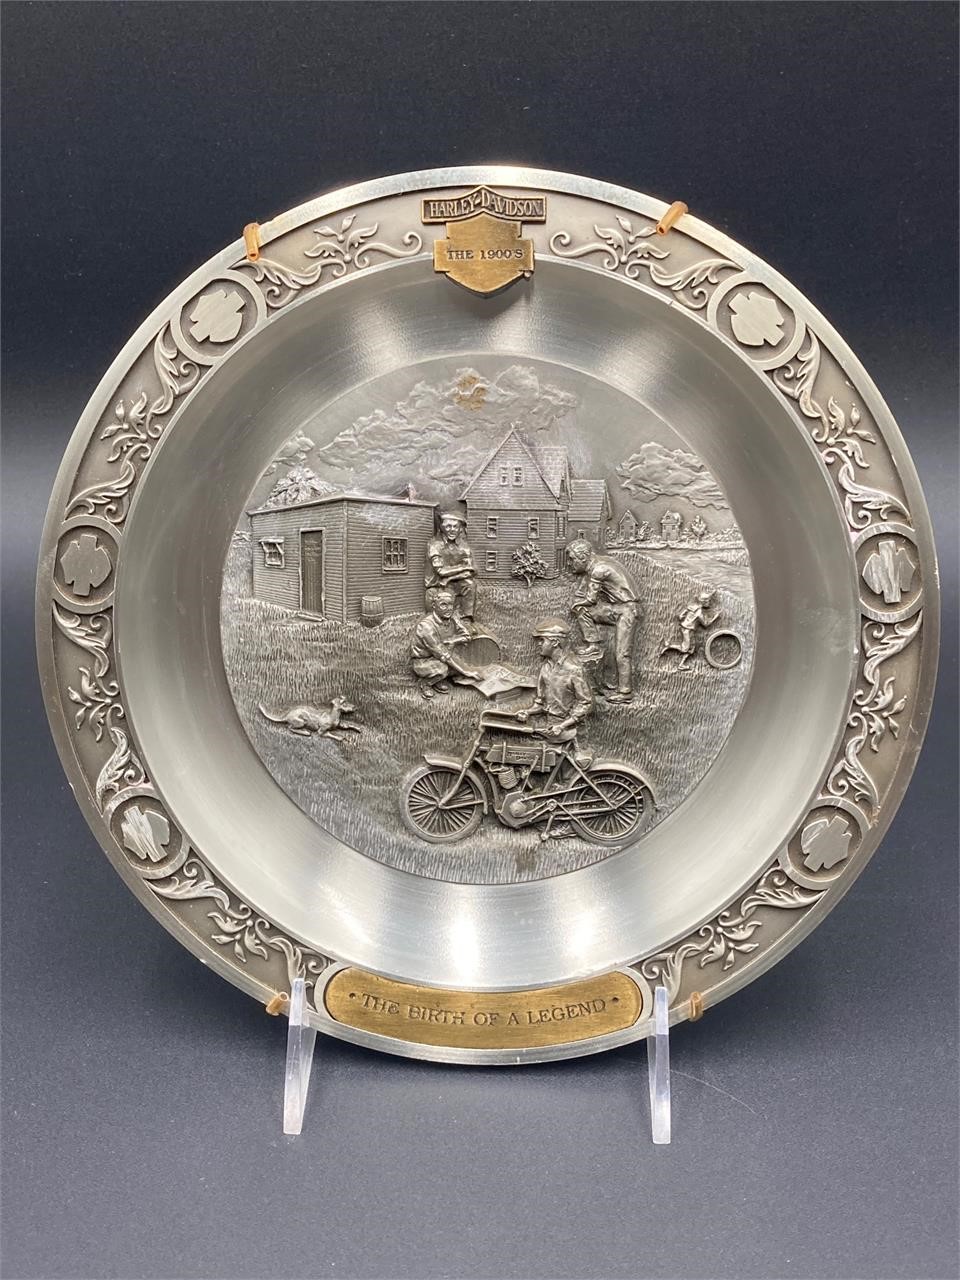 Harley “The Birth Of A Legend” Pewter Plate